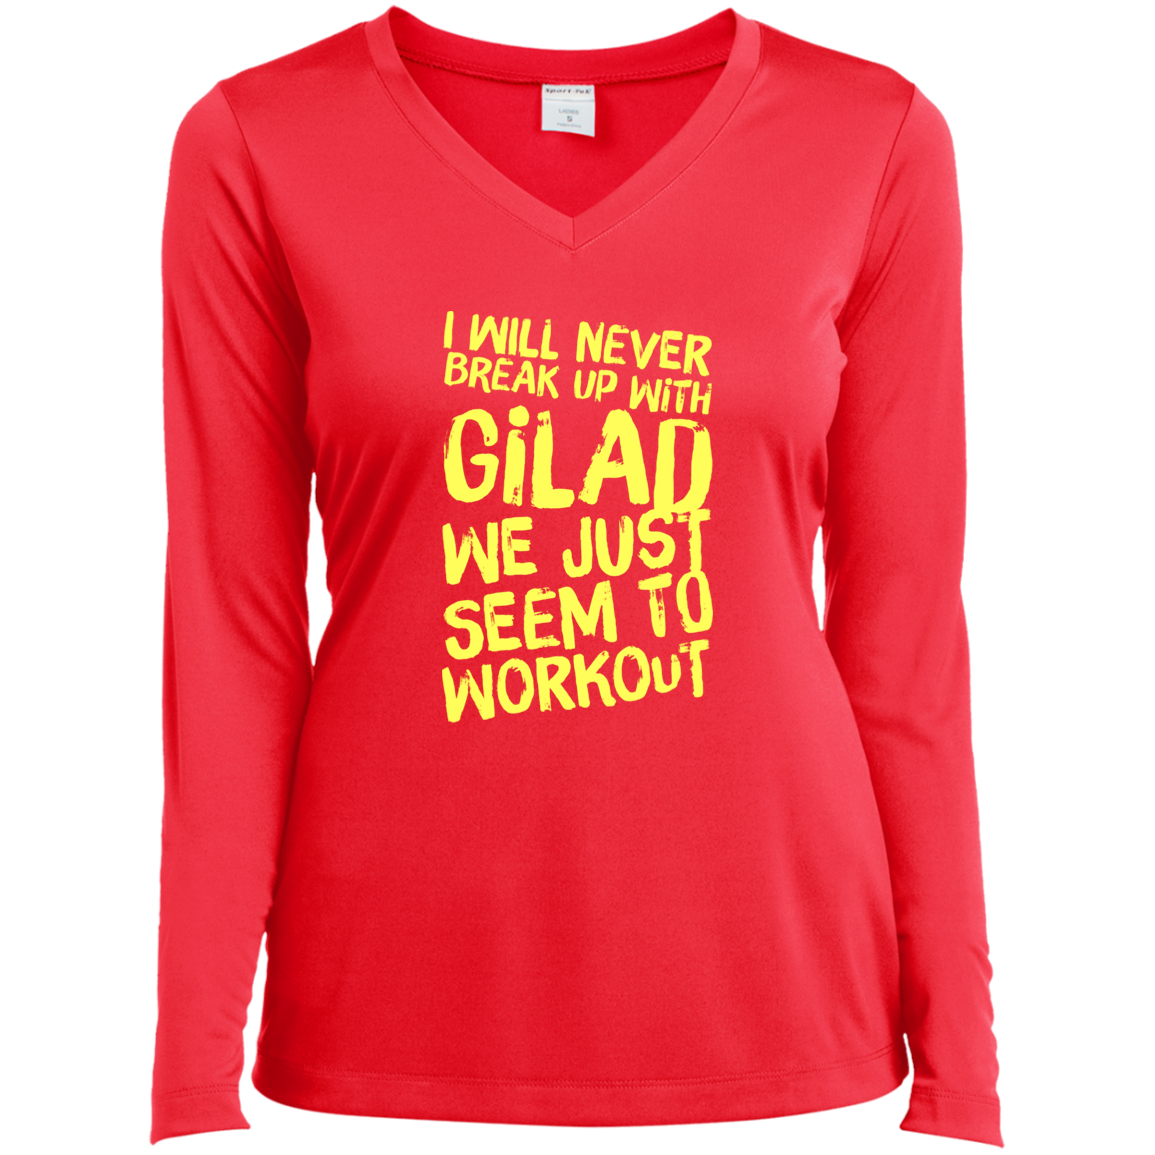 I will Never Break Up With | Ladies’ Long Sleeve Performance V-Neck Tee